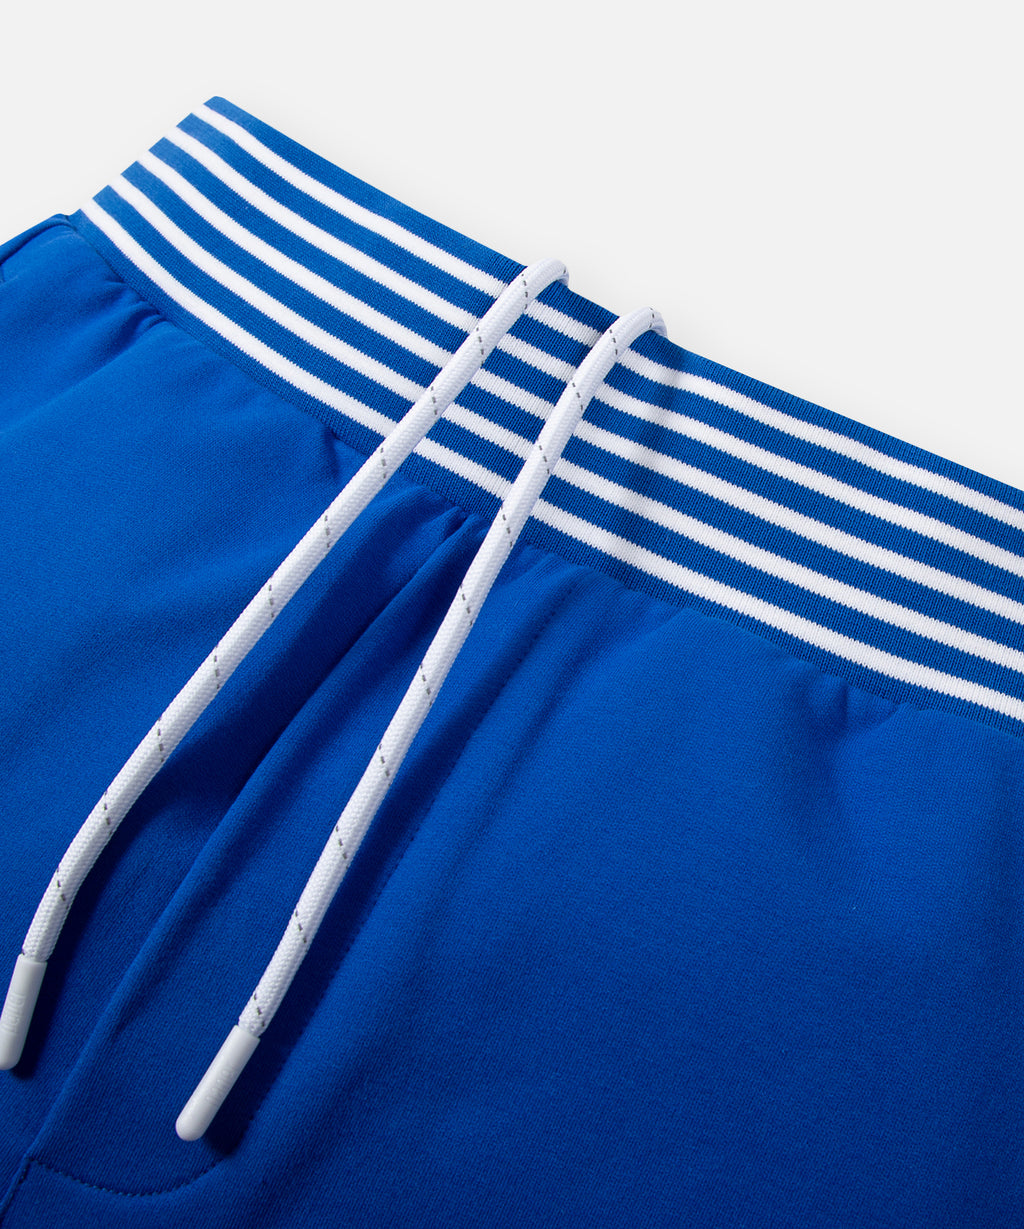  Striped rib waistband with drawcord on Paper Planes Gusset Short color Nautical Blue.